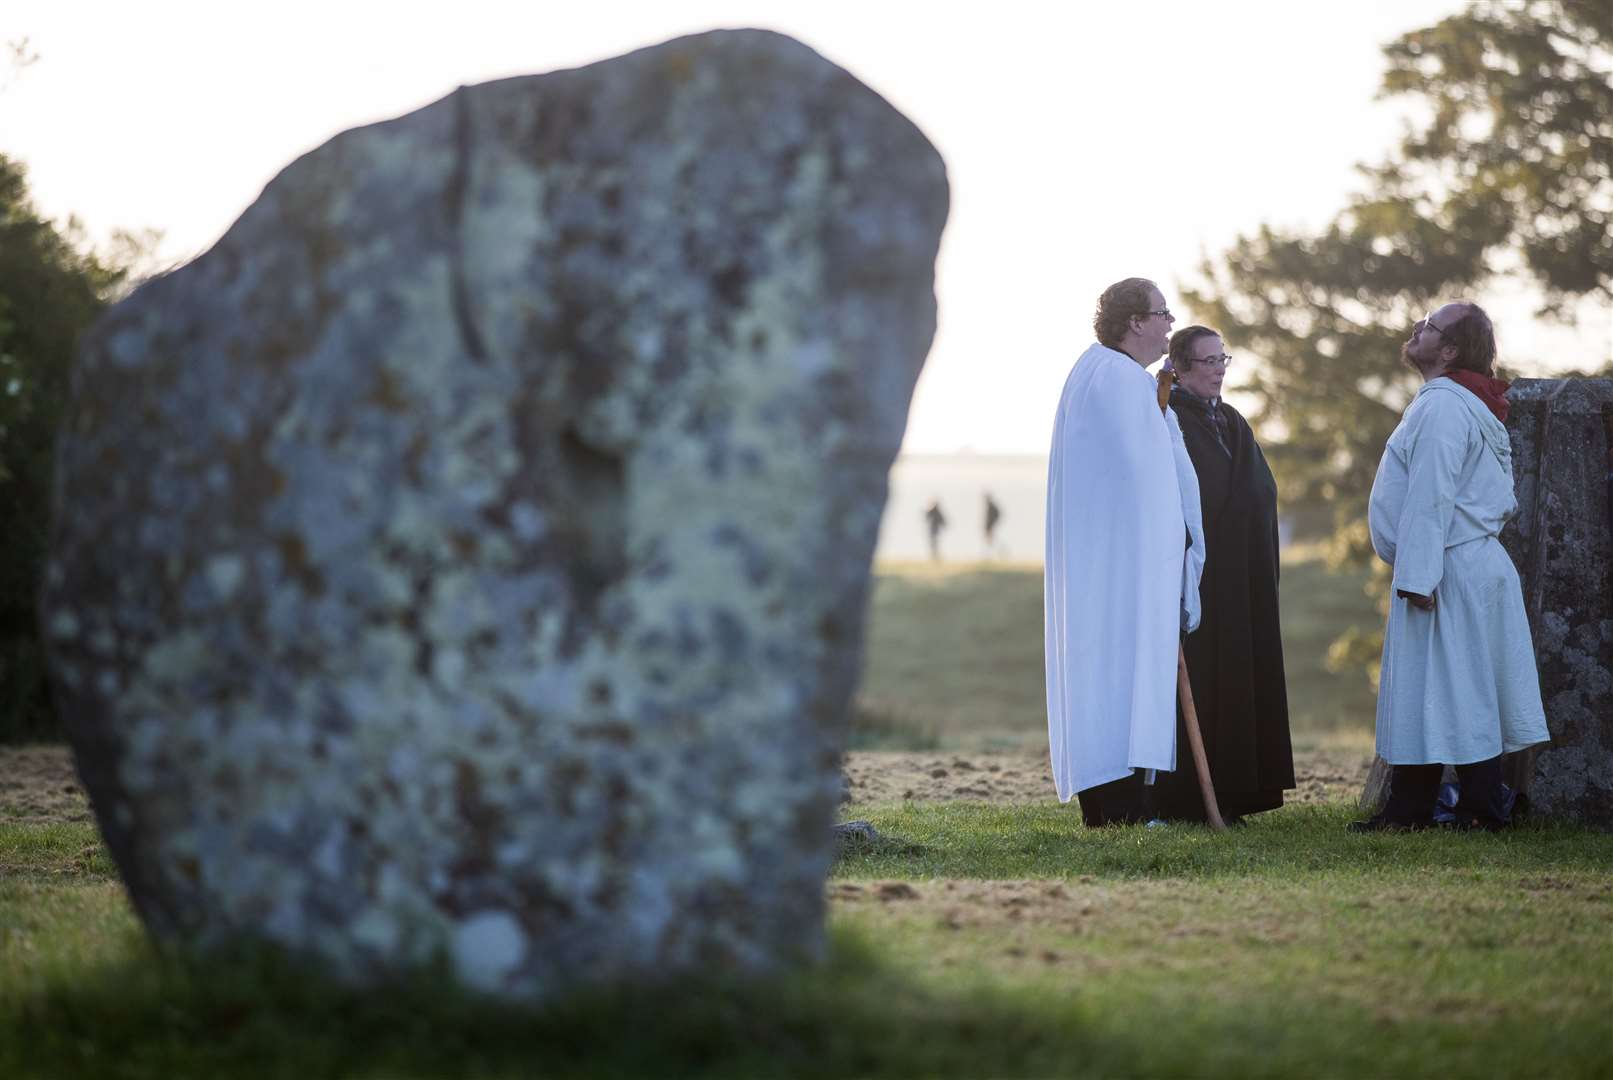 People gather around stones at the Avebury stone circle in Wiltshire, where they celebrated the dawn of the longest day in the UK in 2019 (Andrew Matthews/PA)